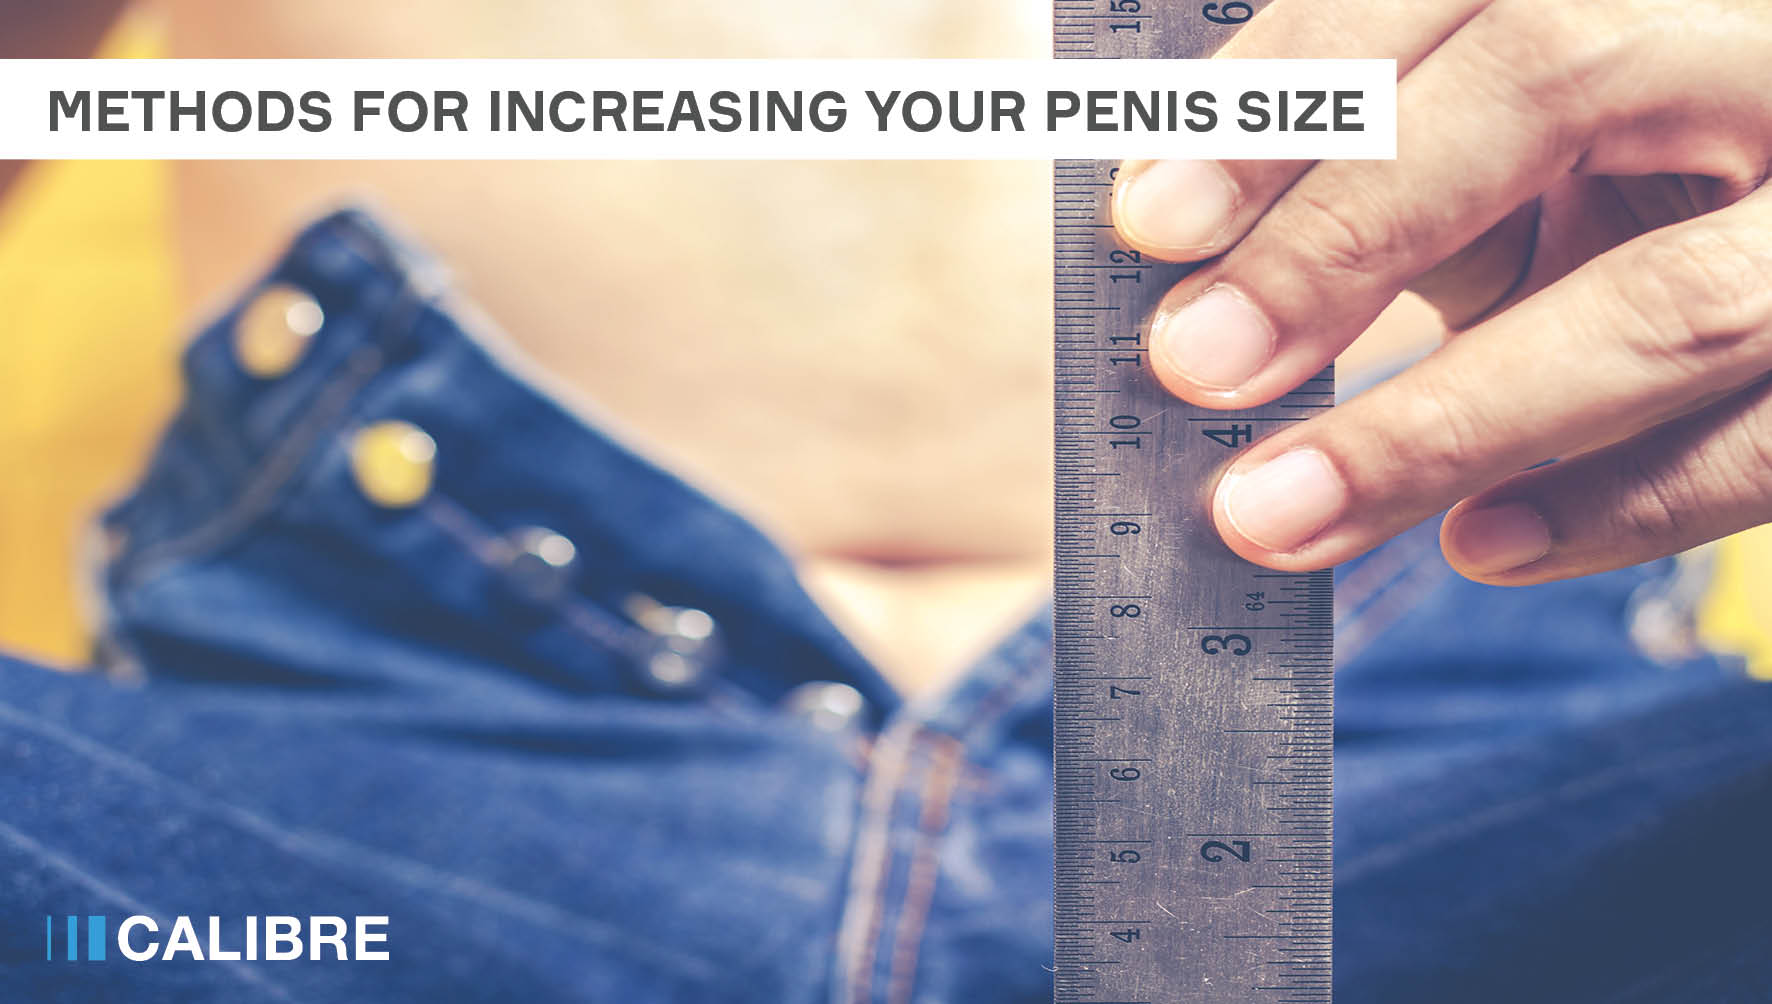 How to increase dick size by extra inch